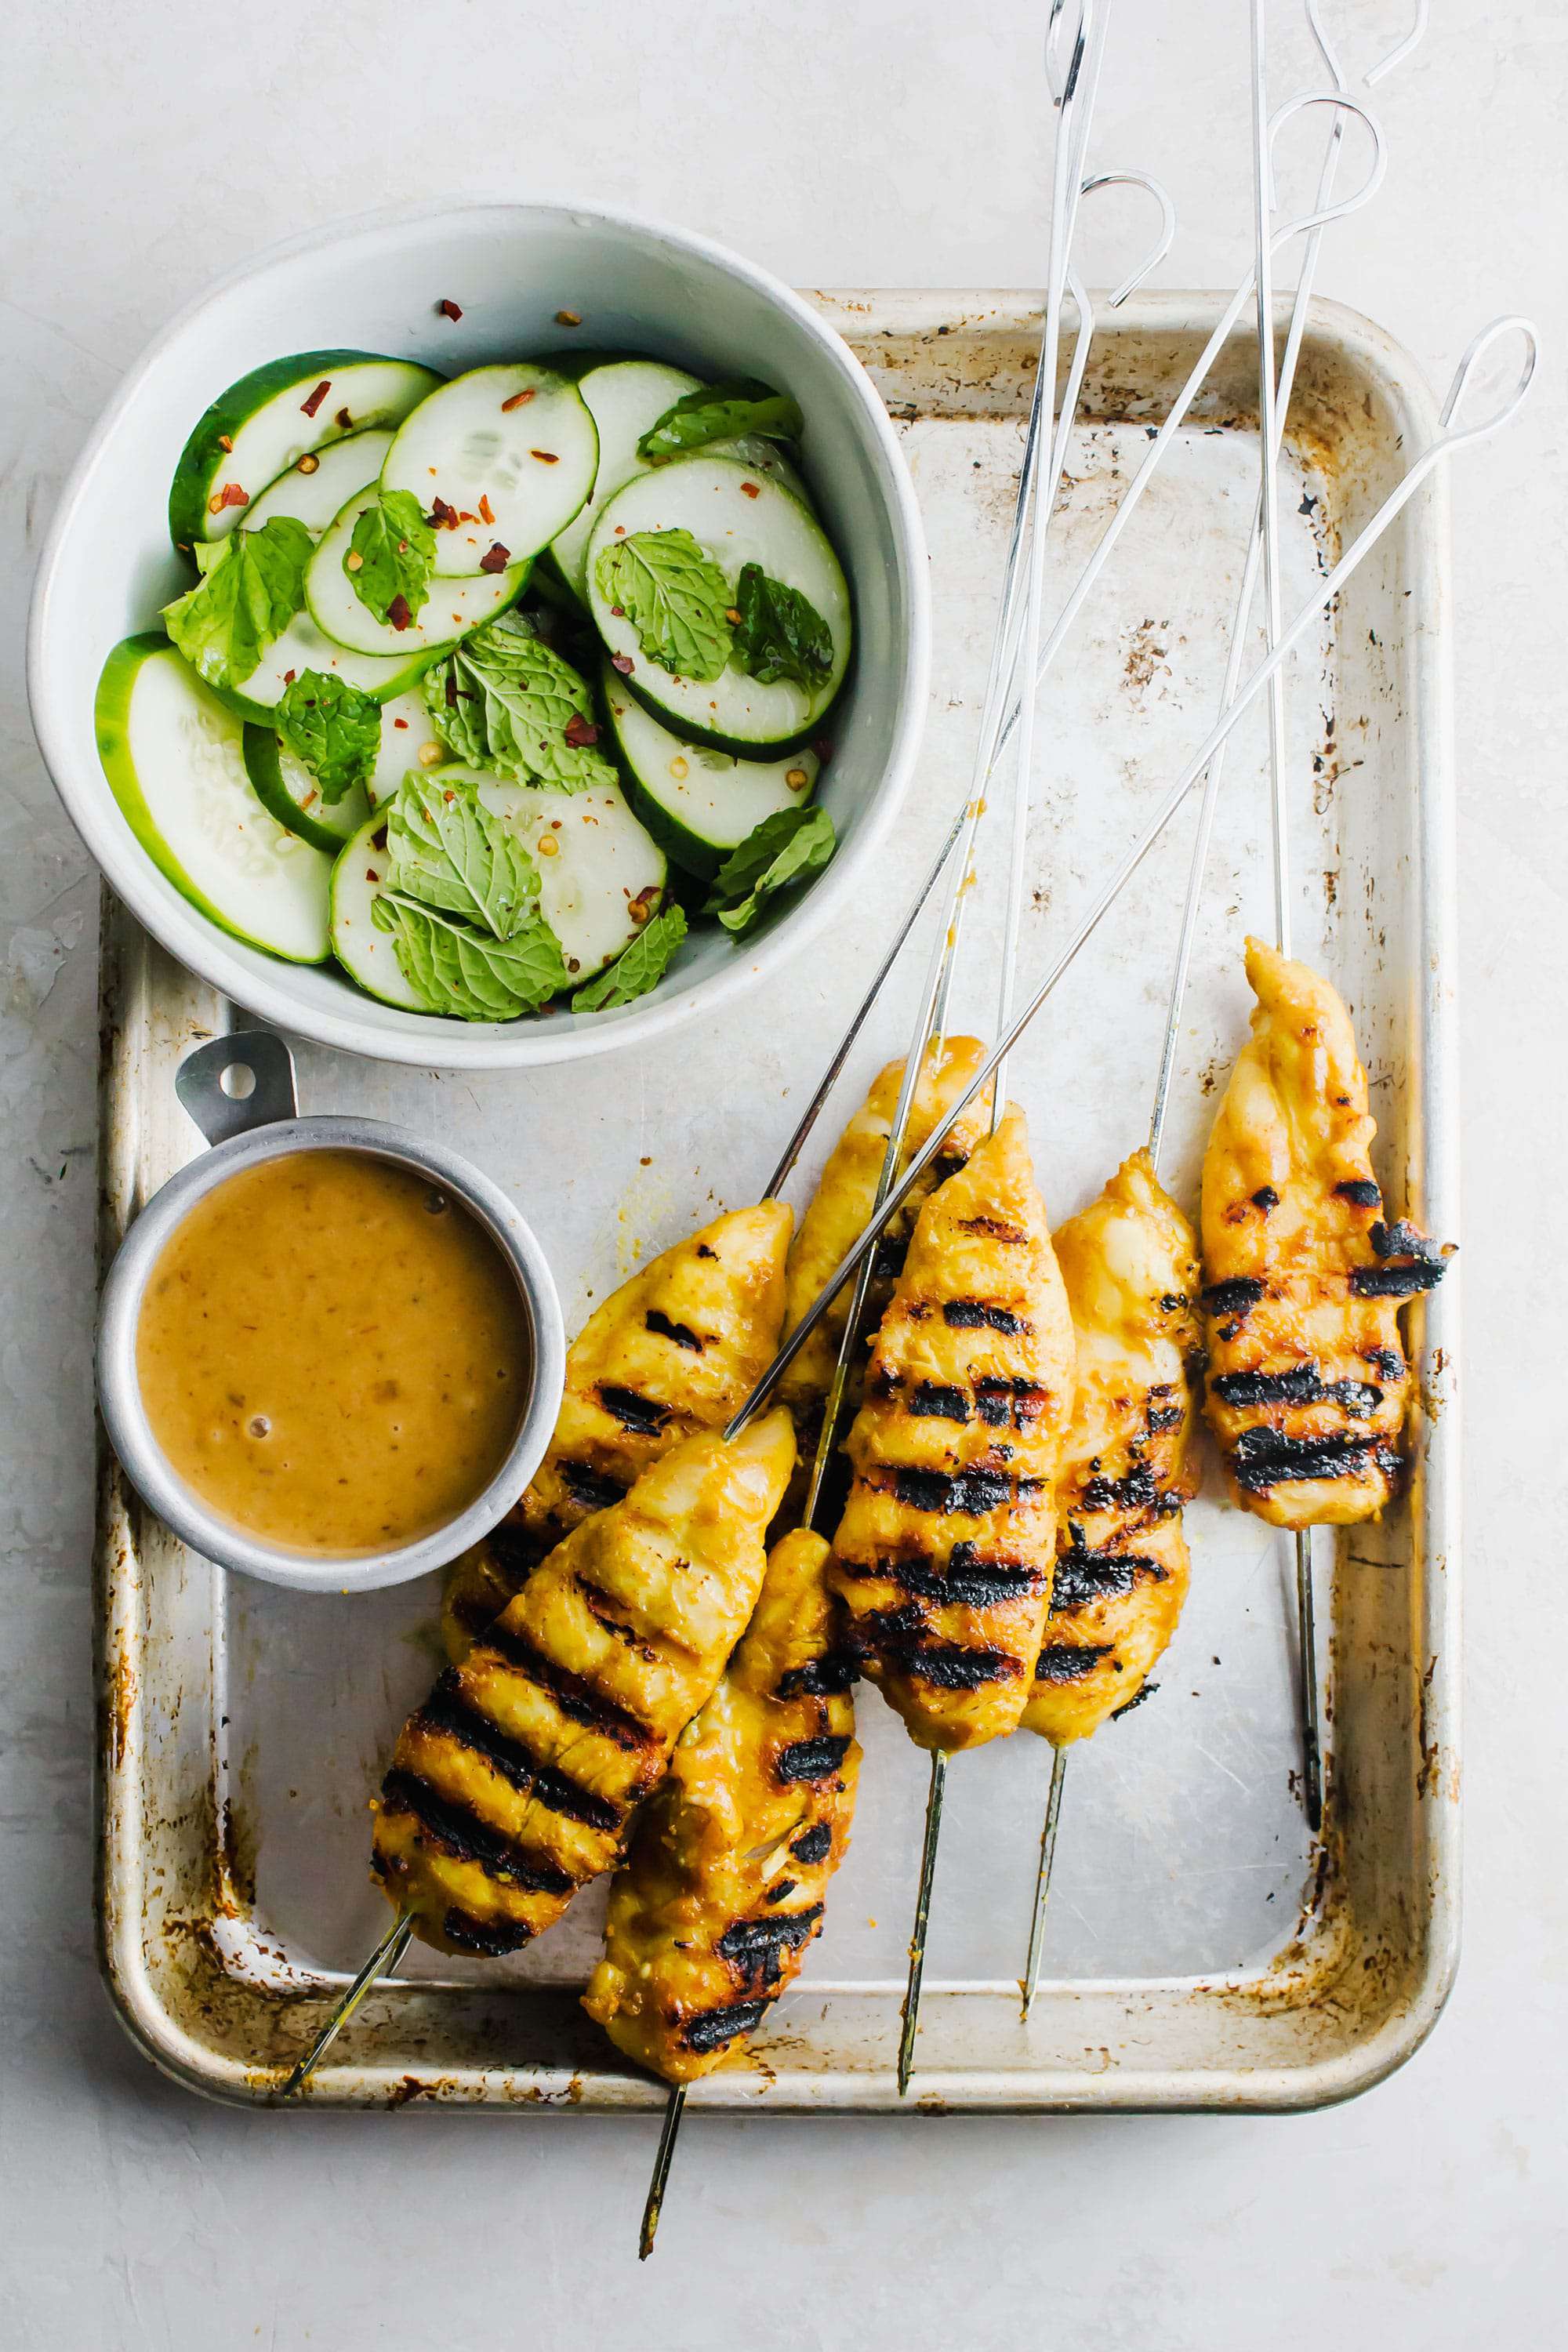 Chicken Satay With Peanut Sauce Aimee Mars,How To Freeze Mushrooms Safely